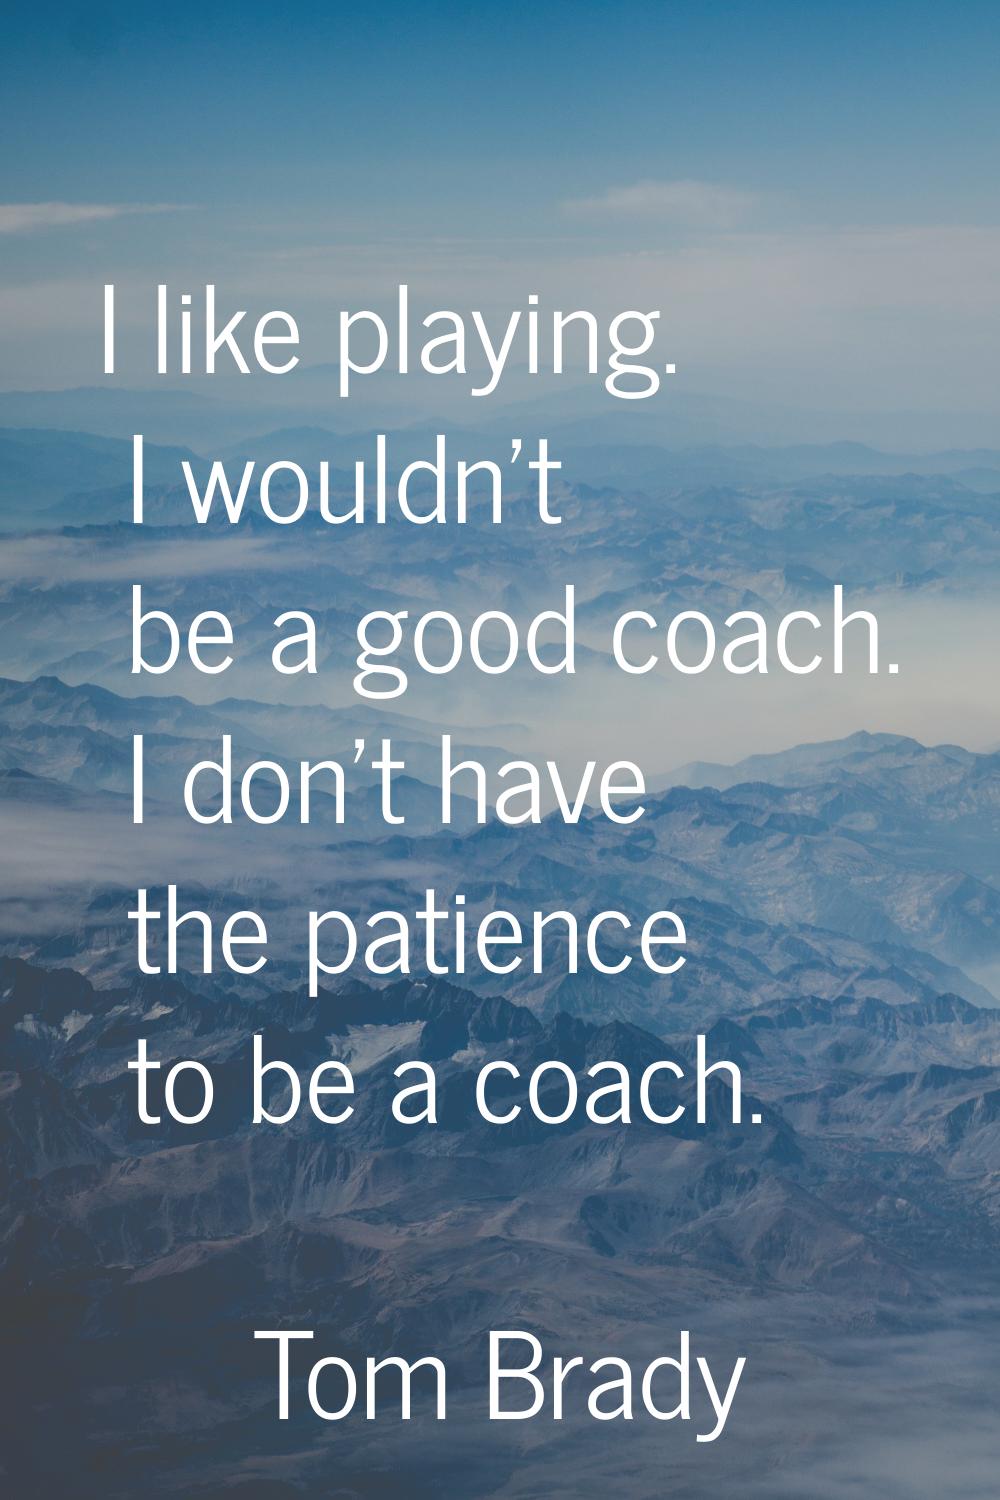 I like playing. I wouldn't be a good coach. I don't have the patience to be a coach.